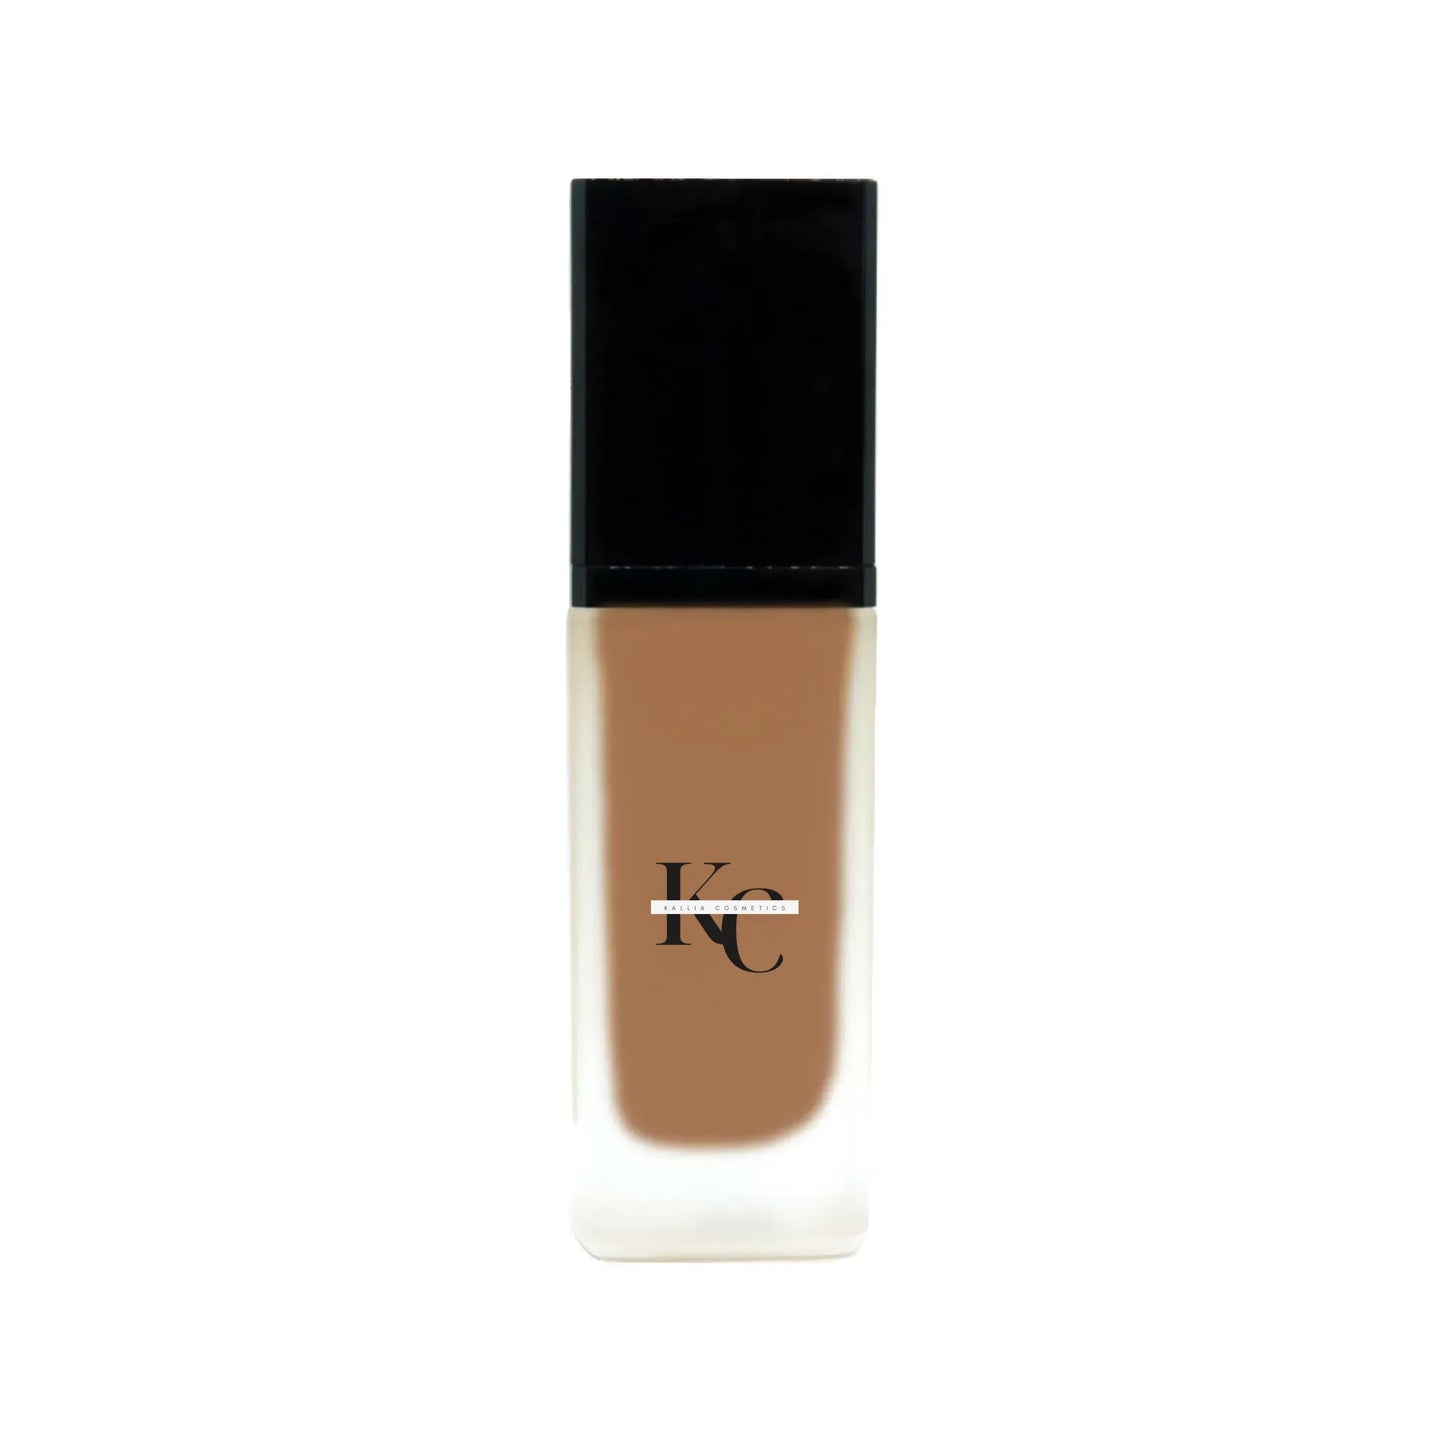 Foundation with SPF